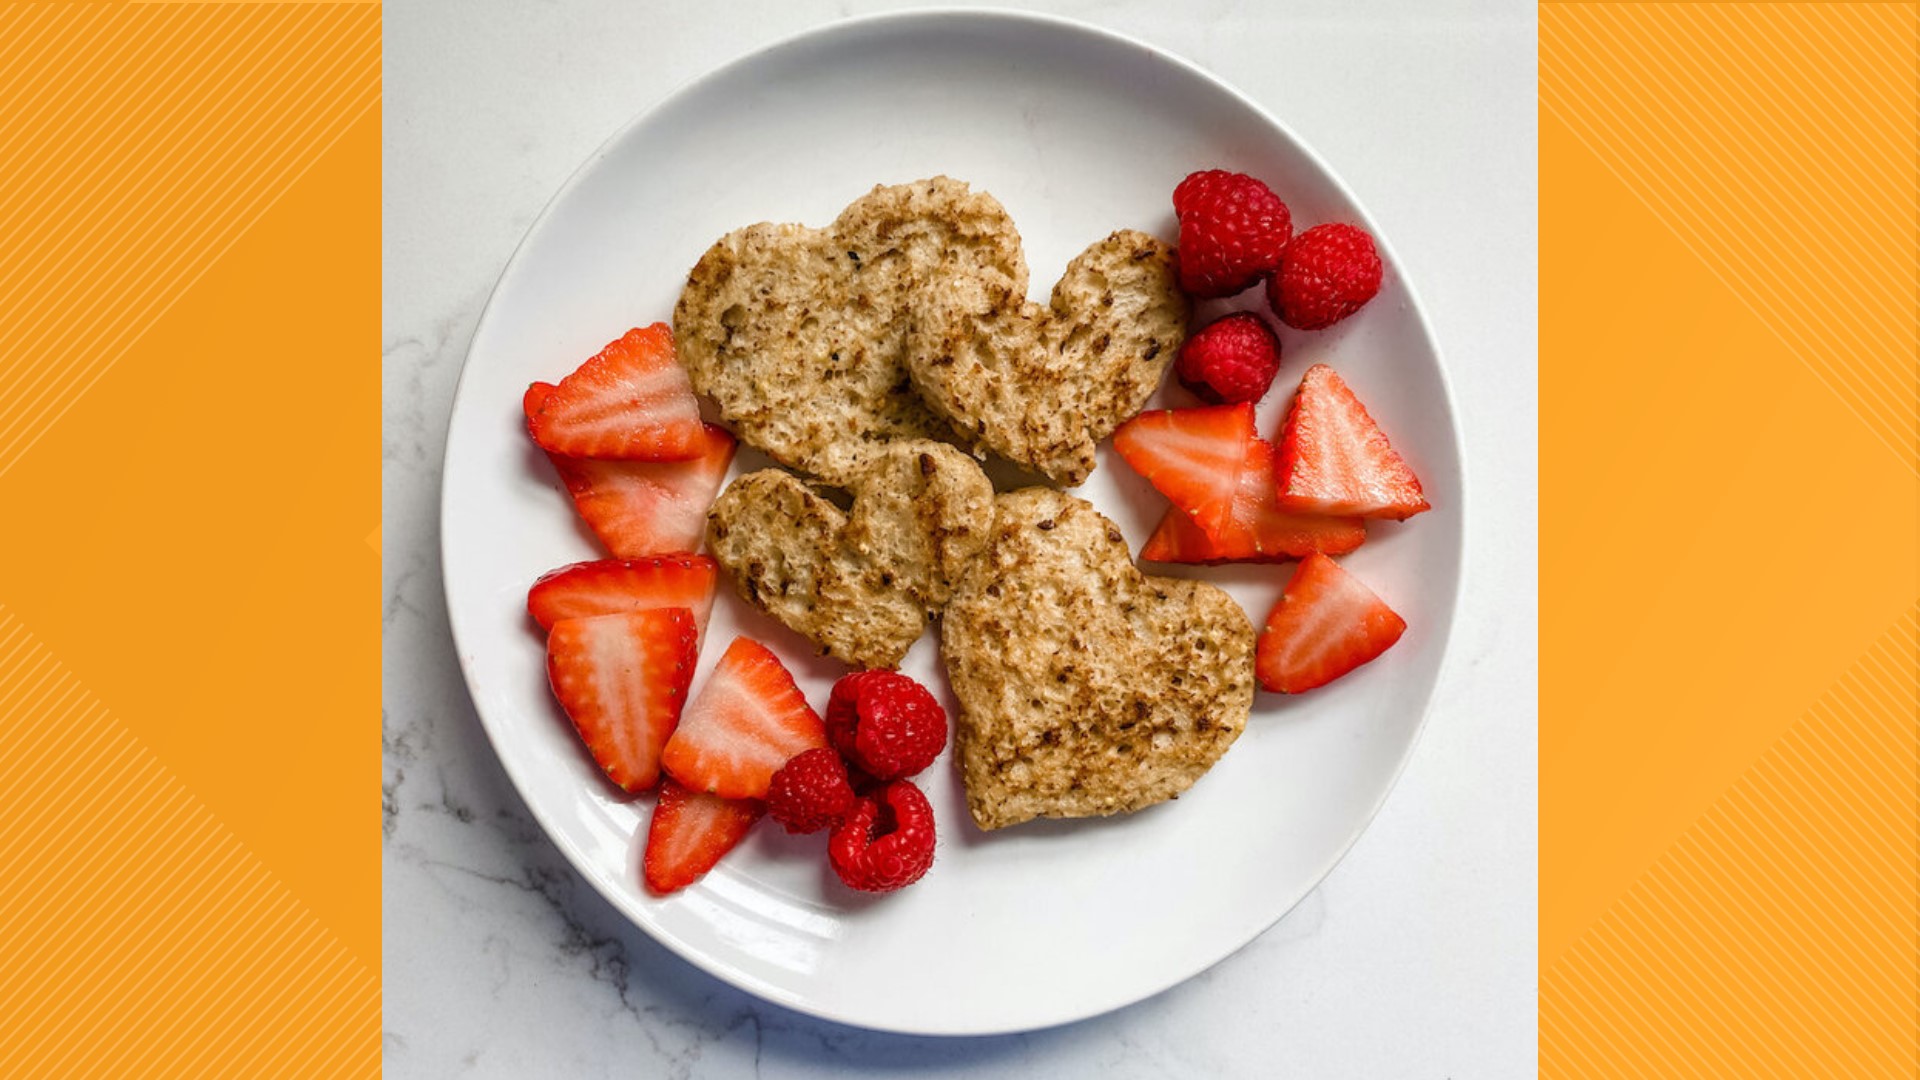 Kara Swanson with Life Well Lived shared three fun, kid-friendly Valentine's Day recipes you'll want to try.